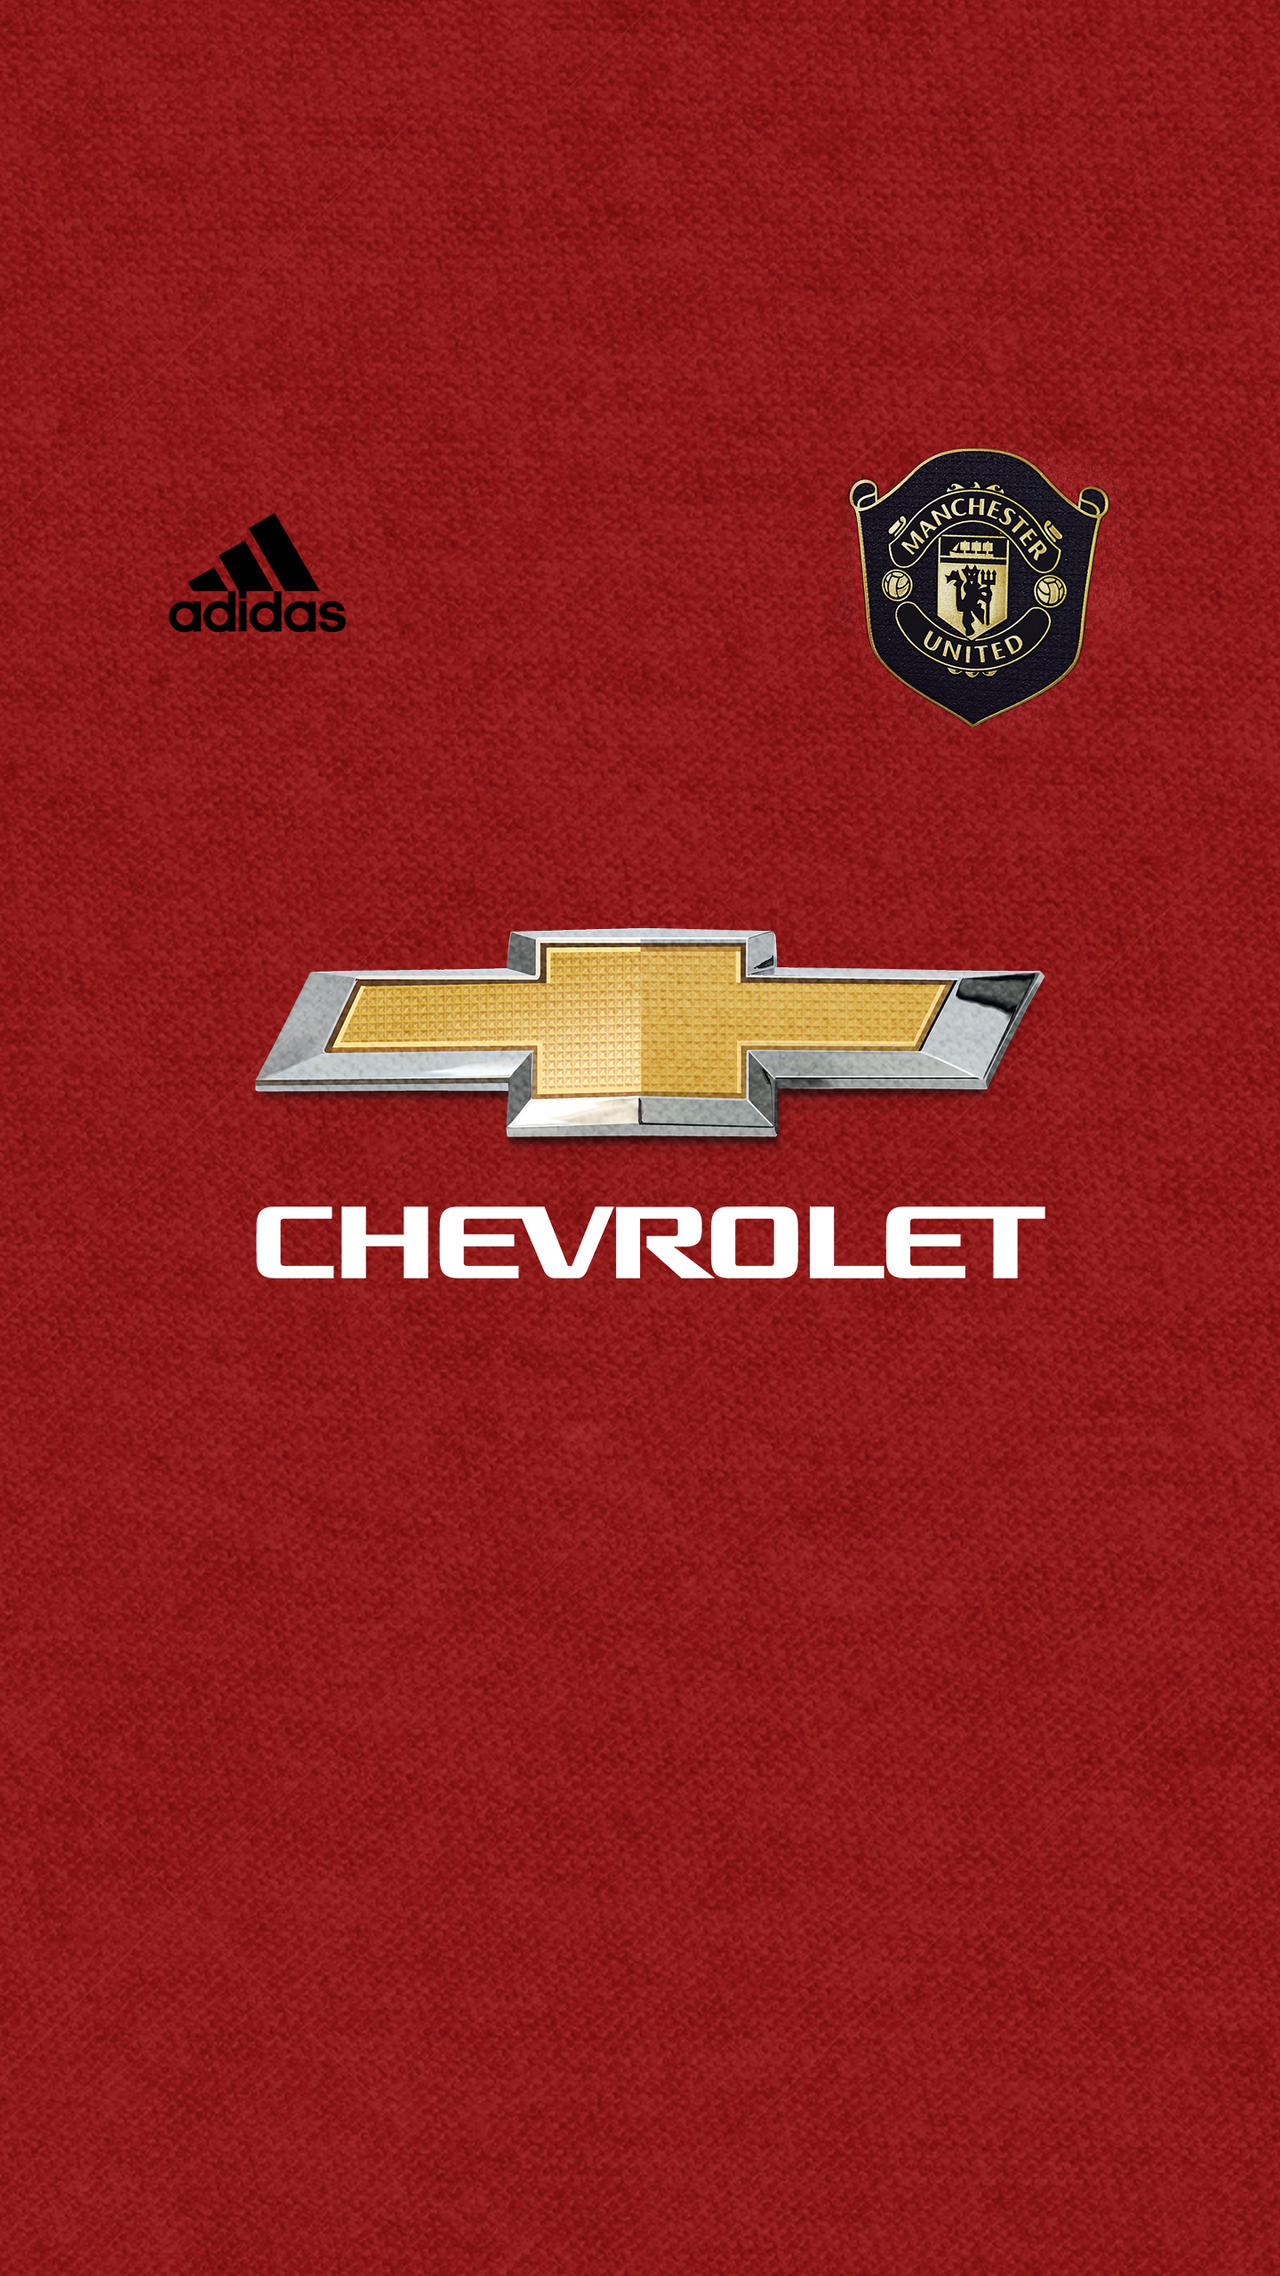 Manchester United - Phone Wallpaper 2019-2020 Home by jgfx-designs on  DeviantArt